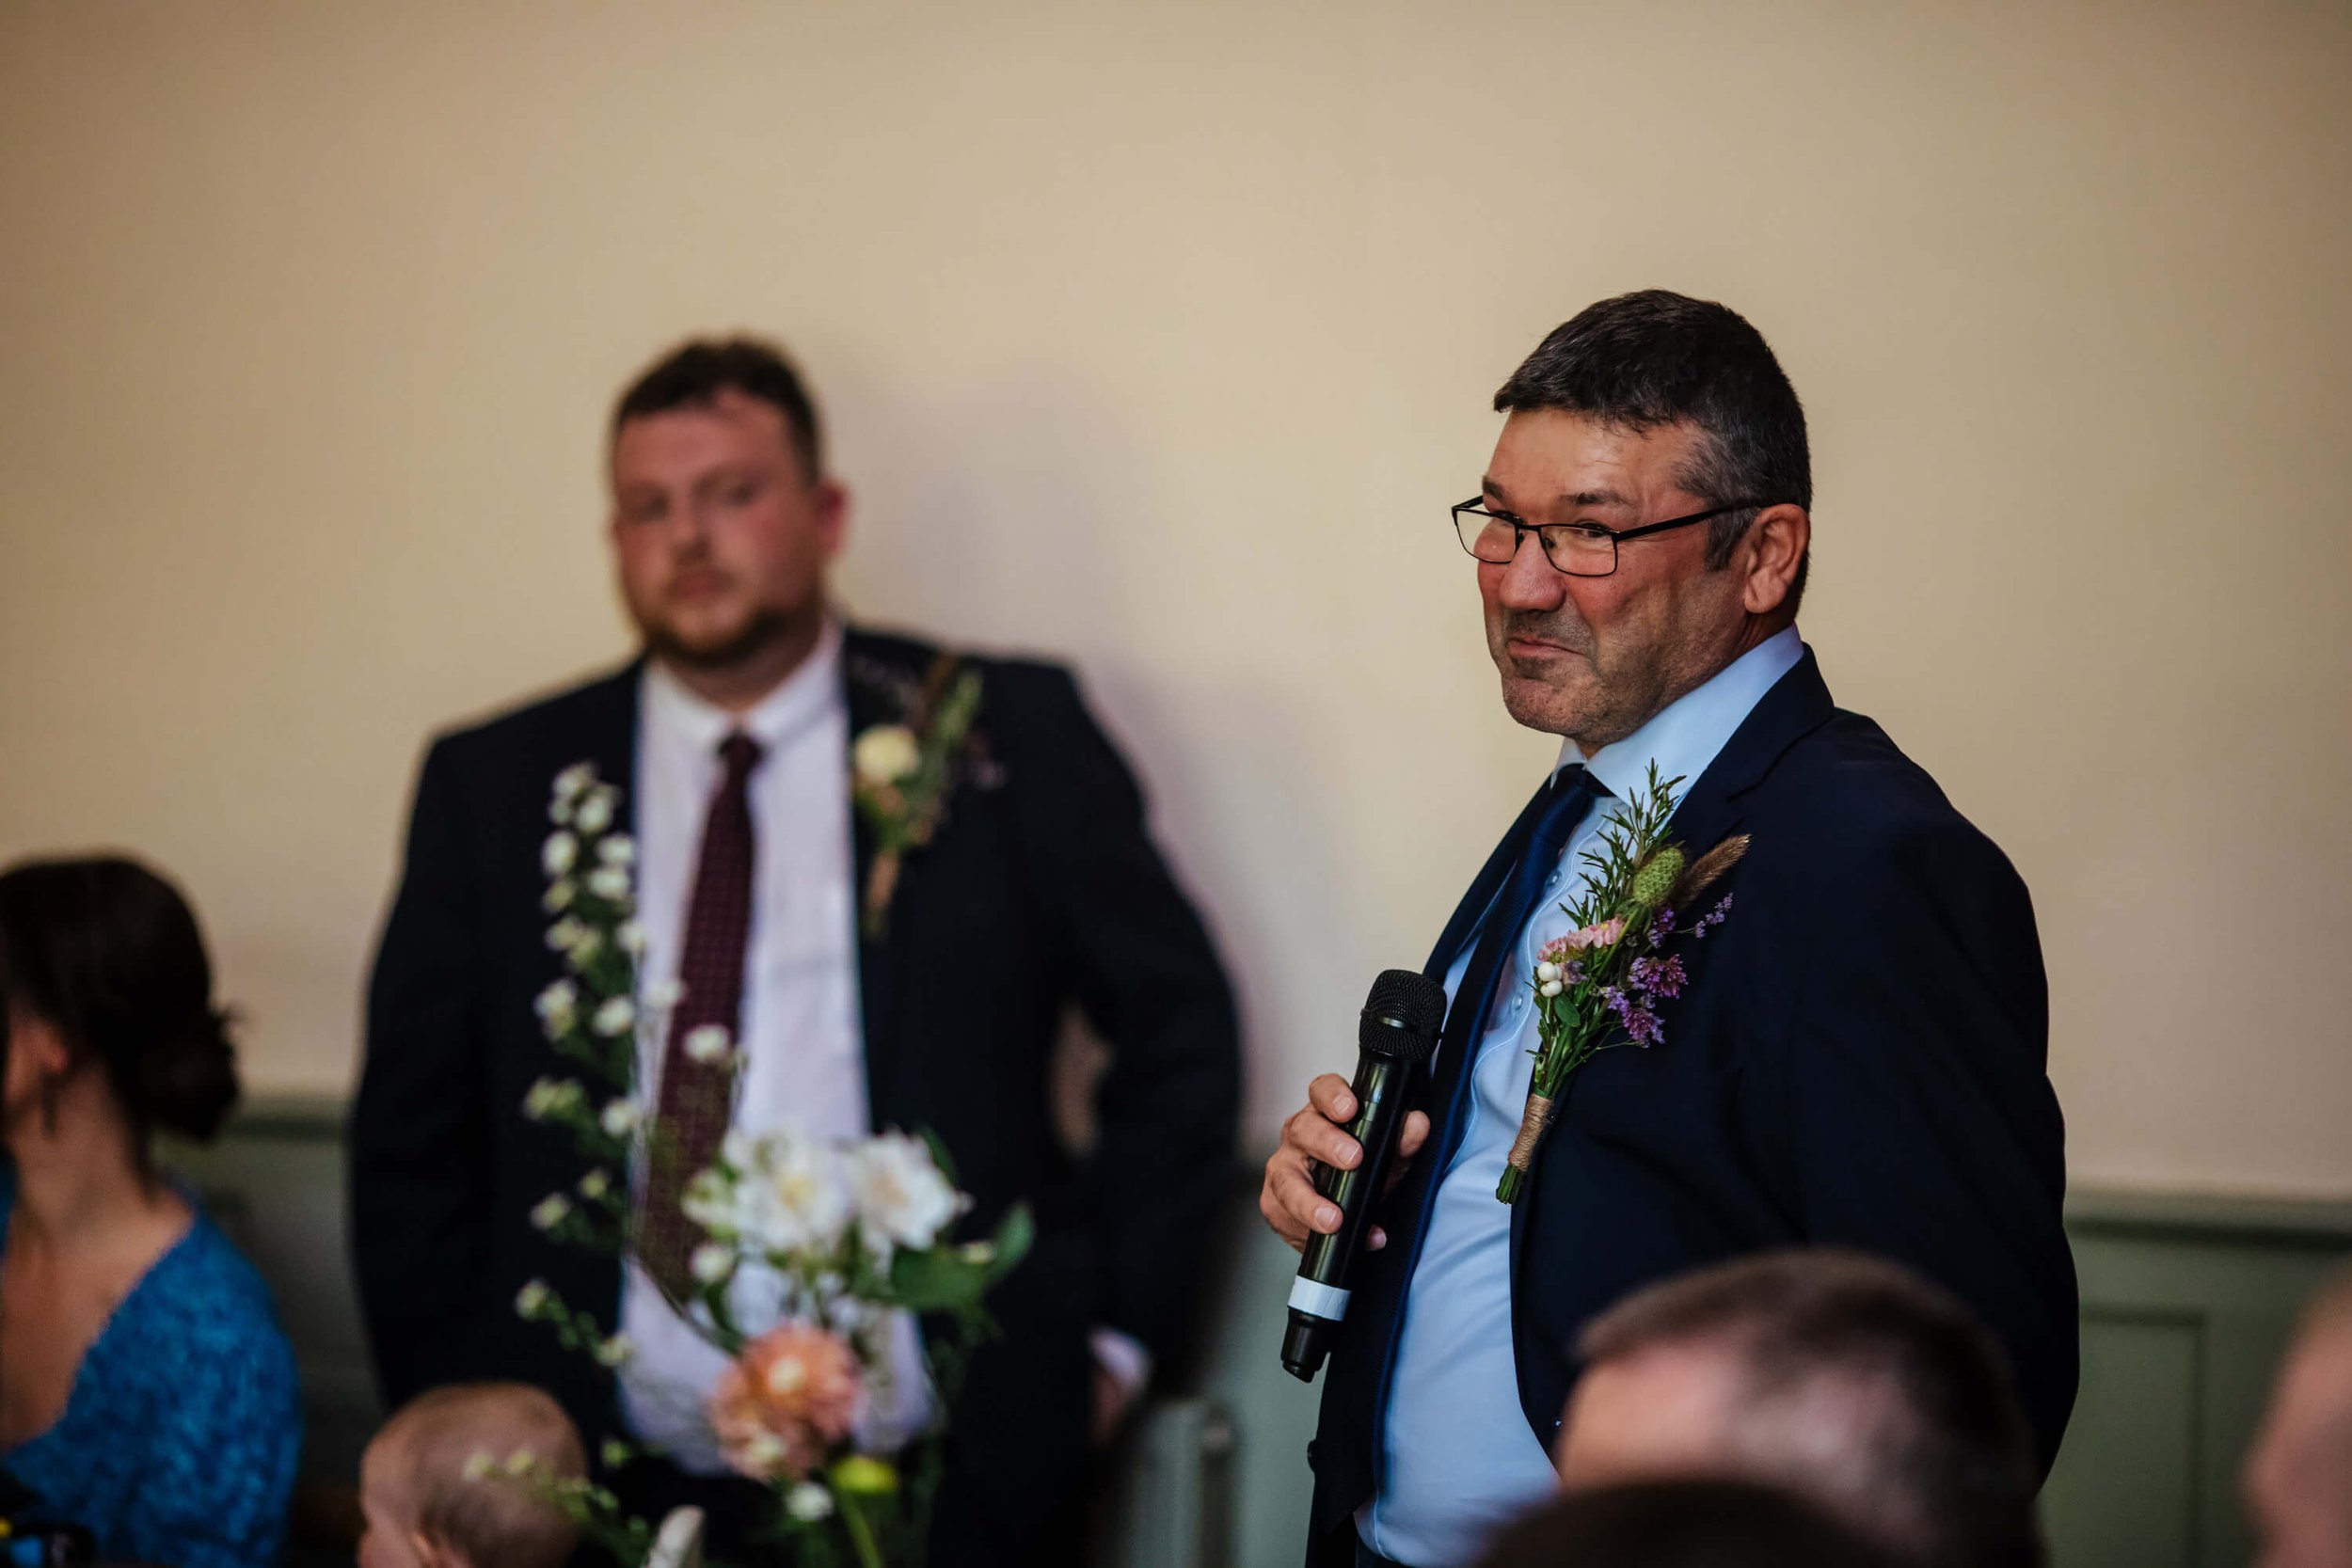 Father of the bride performs his wedding speech at Burnsall Village Hall